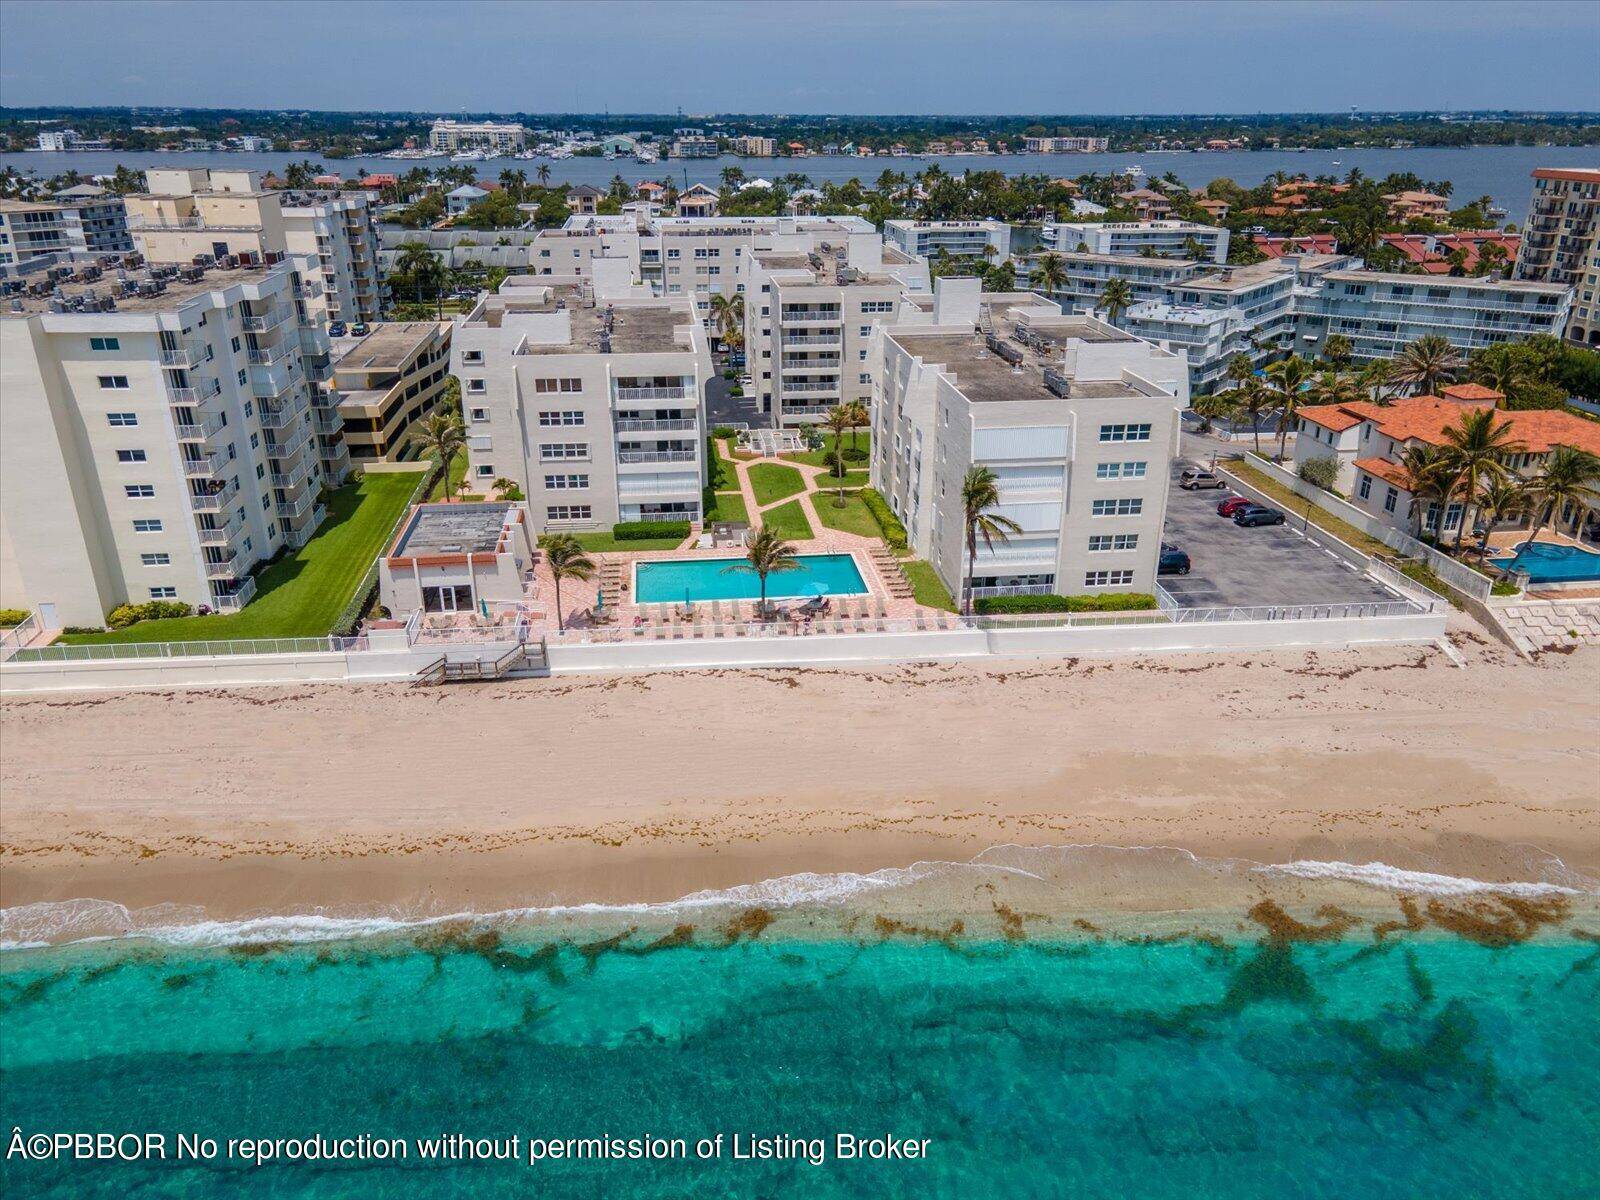 This 3 bedroom 2 bath condominium in Palmsea is steps from the beach, renovated, completely furnished and ready for next season.